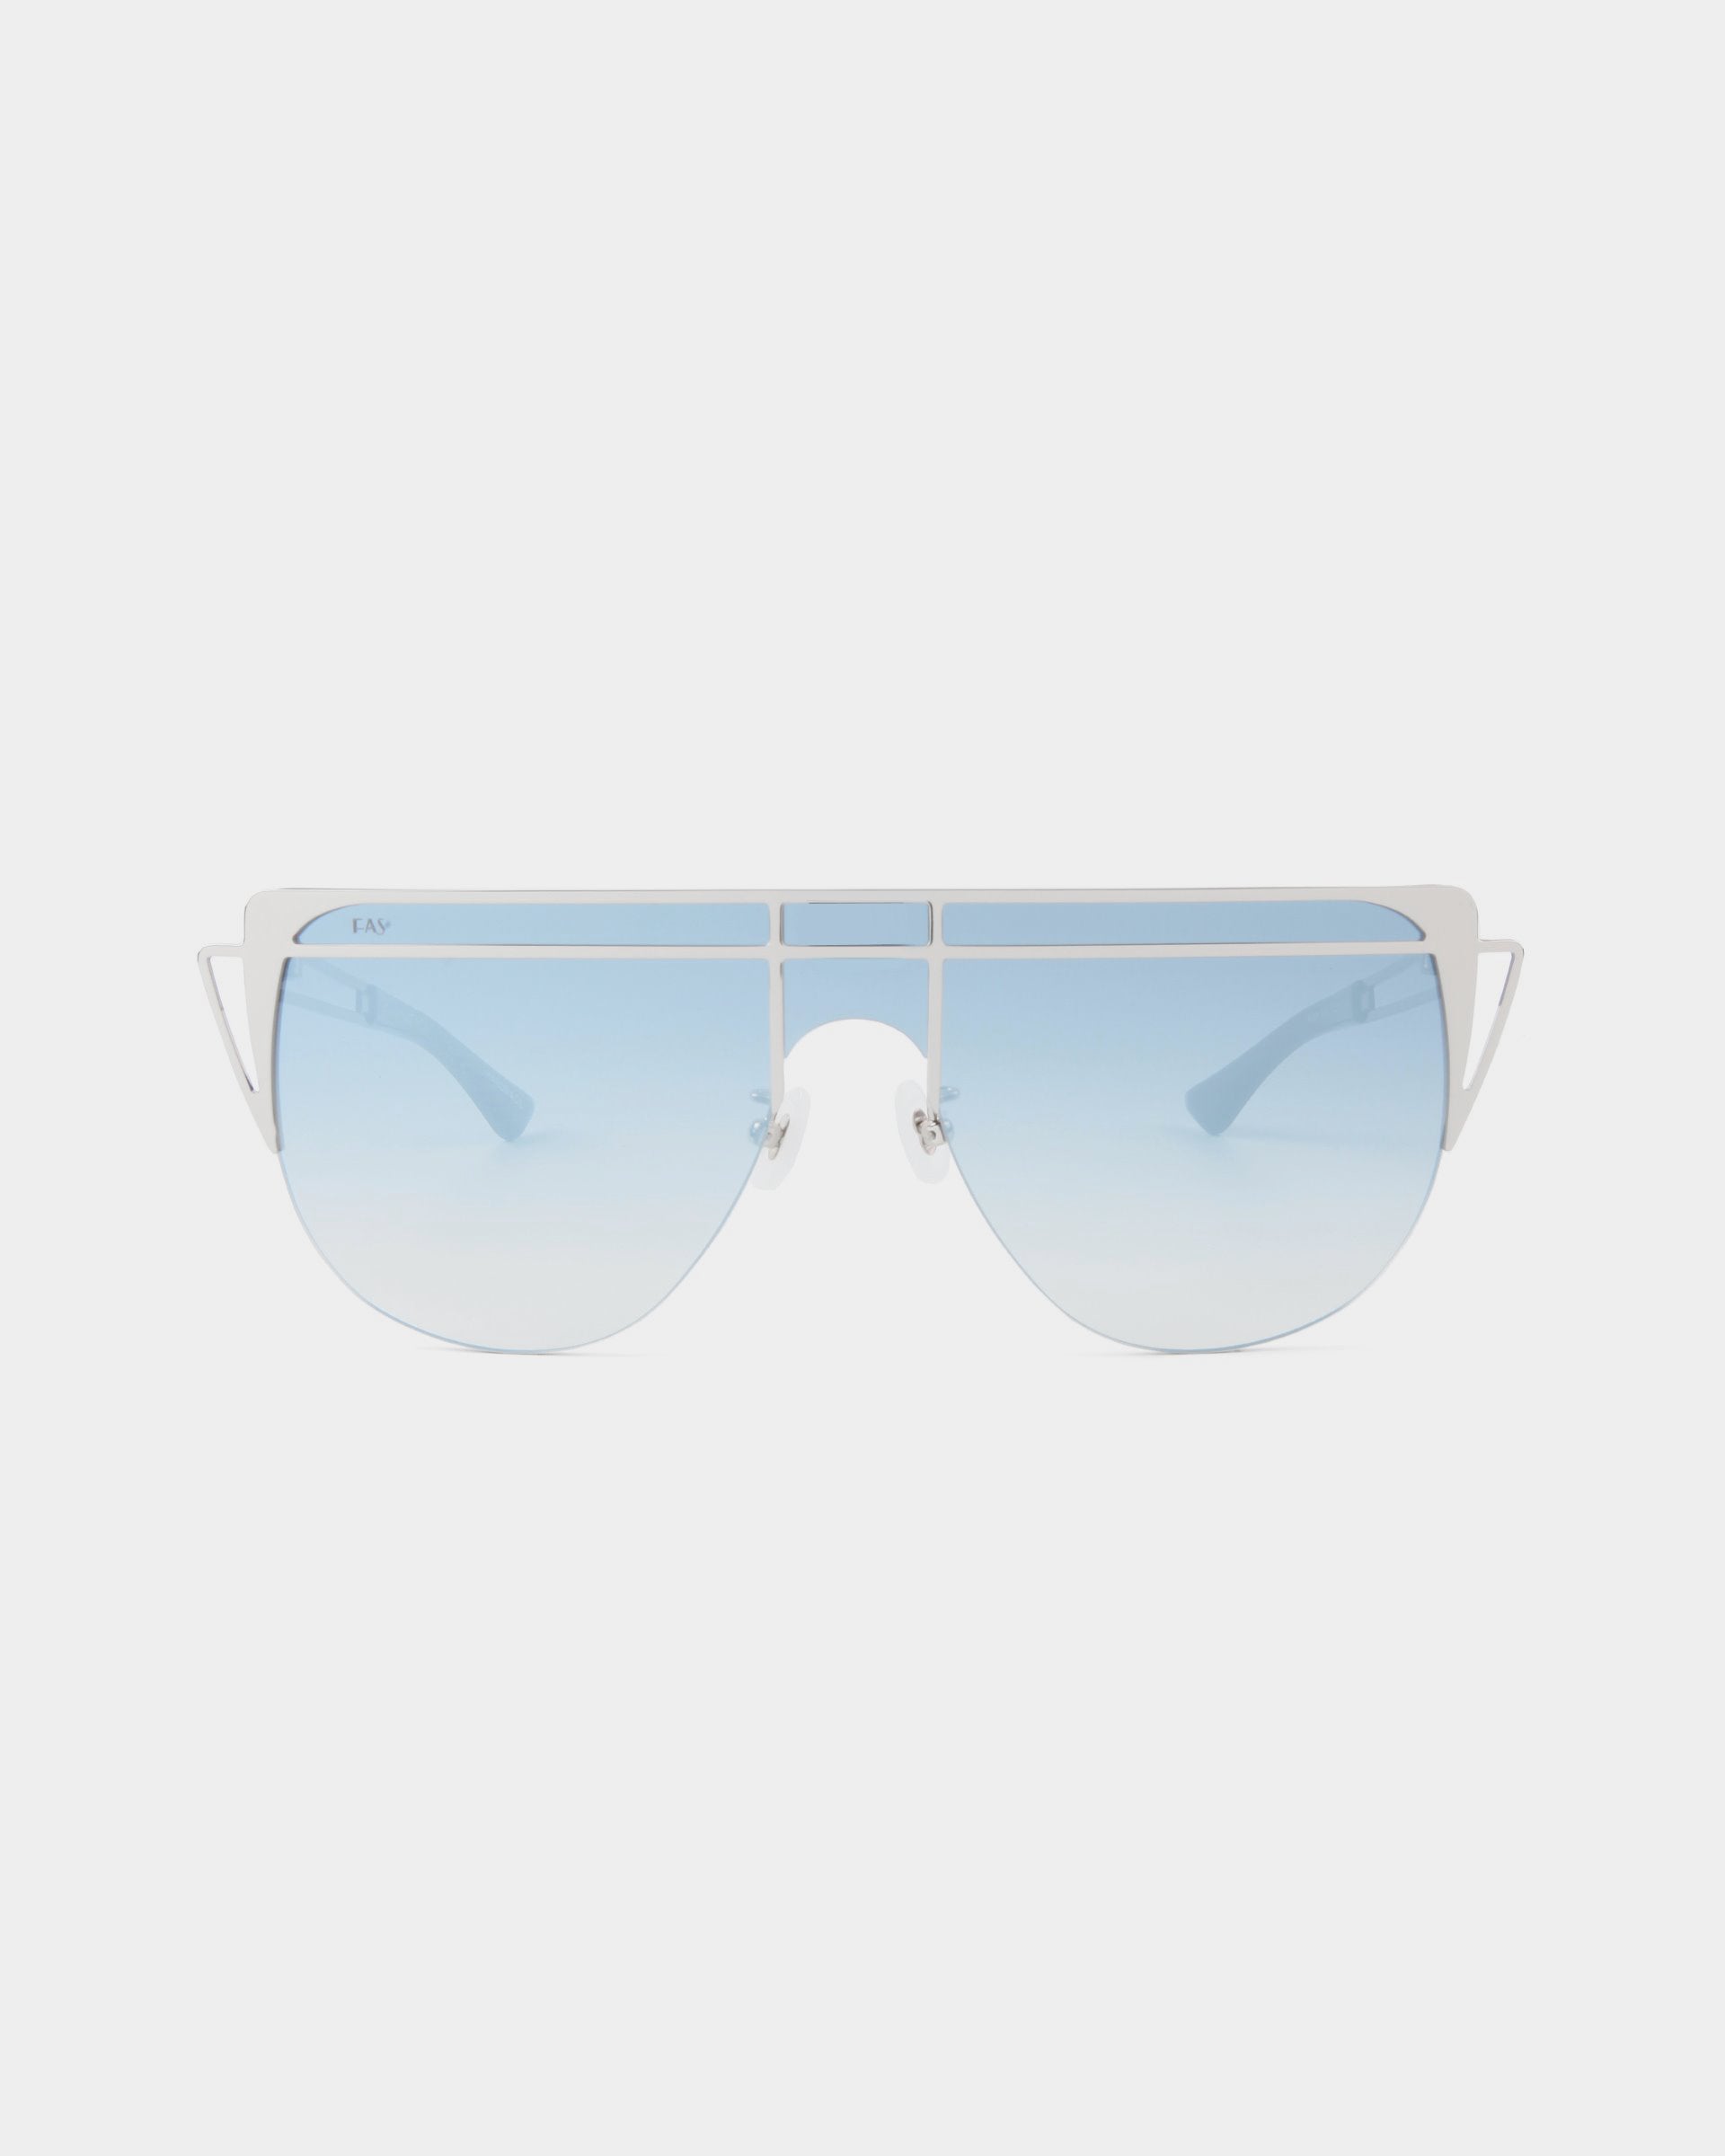 A pair of avant-garde aviator-style sunglasses with a thin, white metal frame and gradient blue lenses. The temples are slim, featuring a double bridge at the nose area. They offer 100% UV protection. These are the Alien by For Art&#39;s Sake®. The background is plain white.